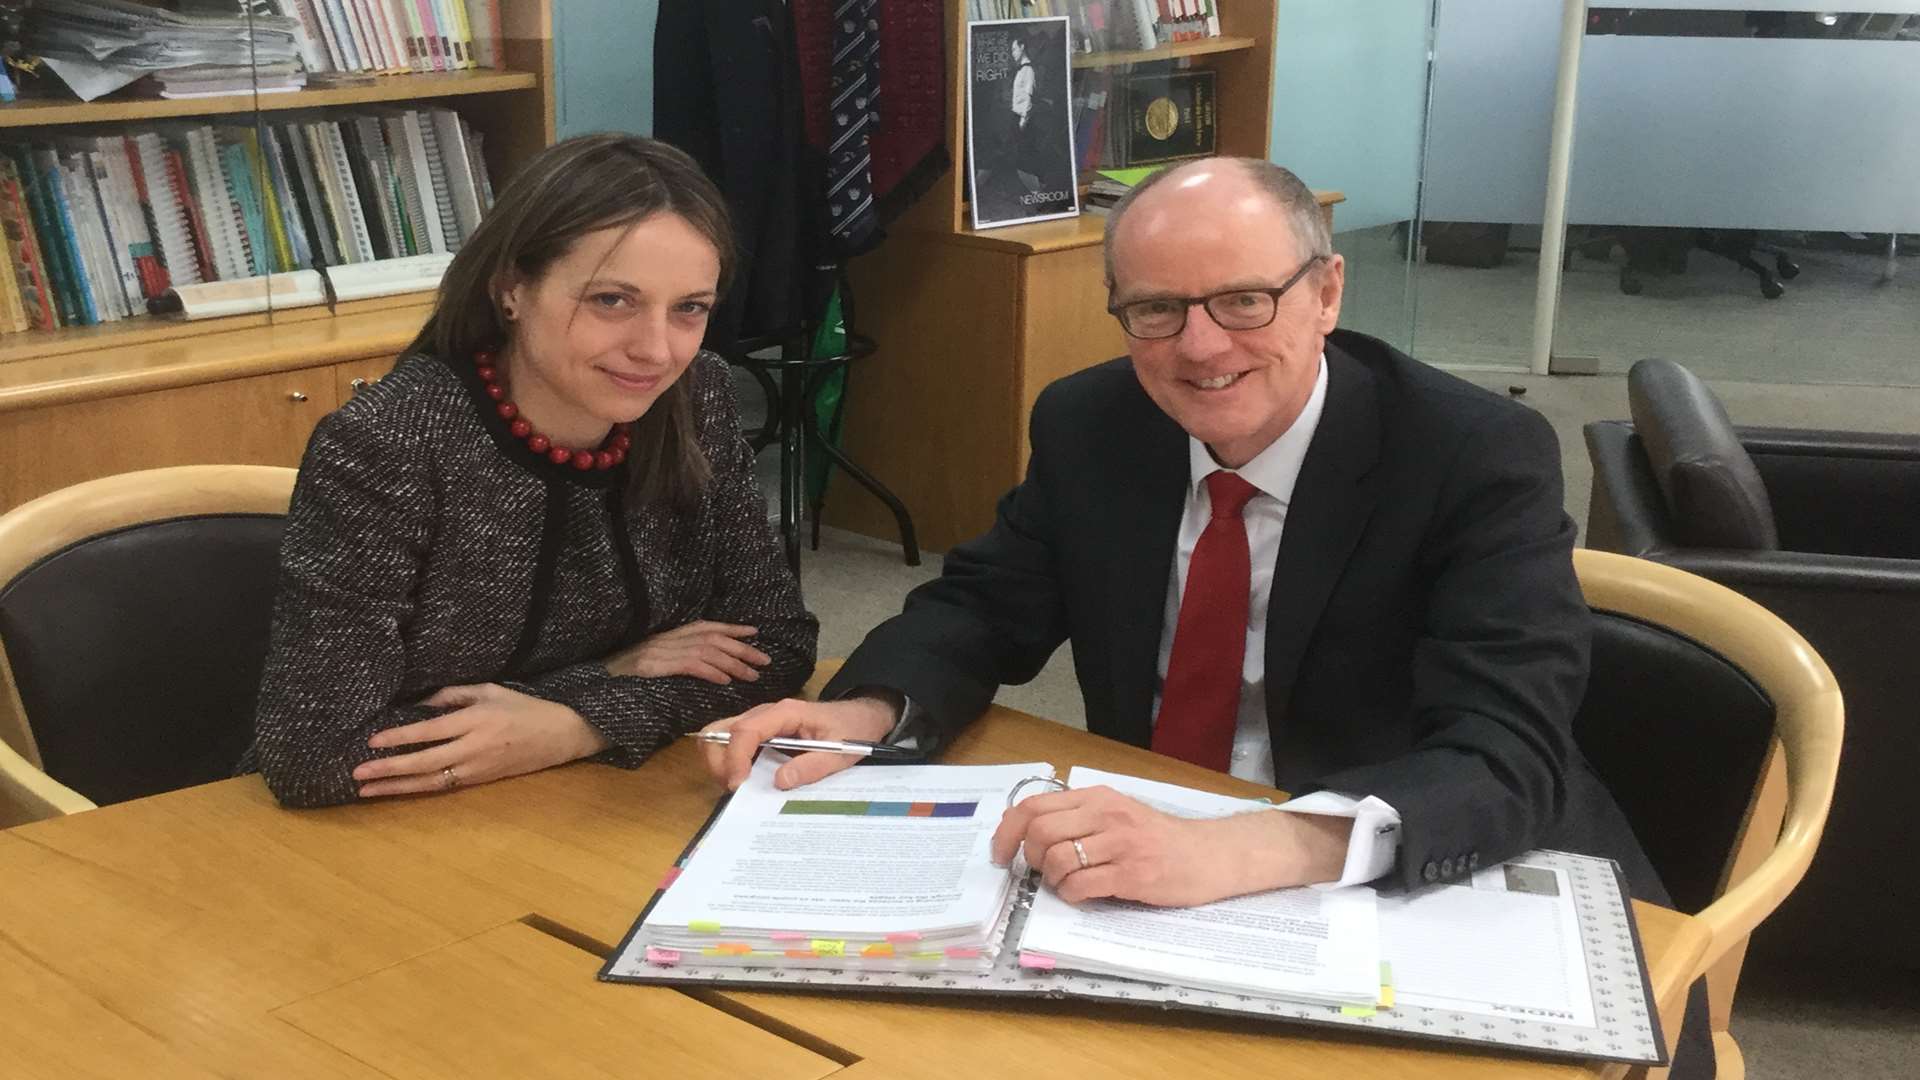 MP for Faversham and Mid Kent, Helen Whately with education minister Nick Gibb